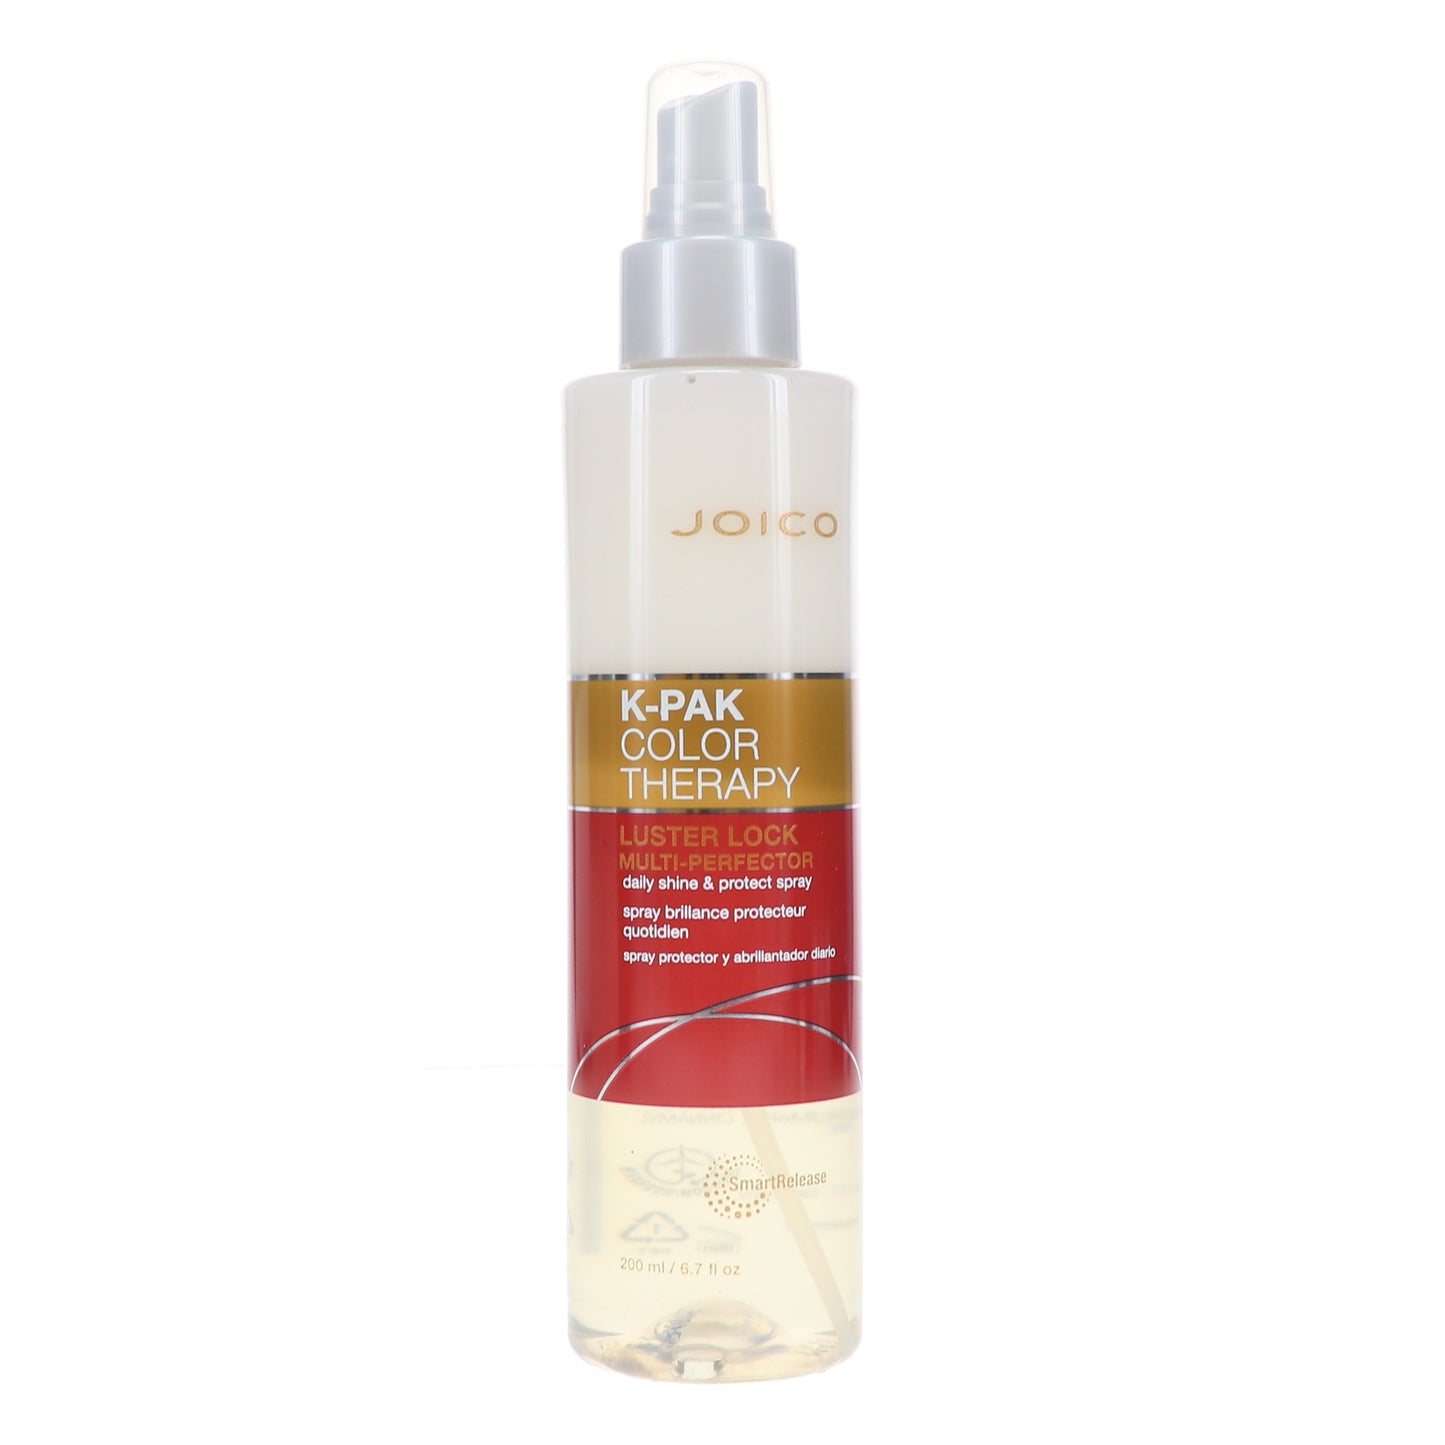 Joico K-Pak Color Therapy Luster Lock Multi Perfector Daily Shine and Protect Spray